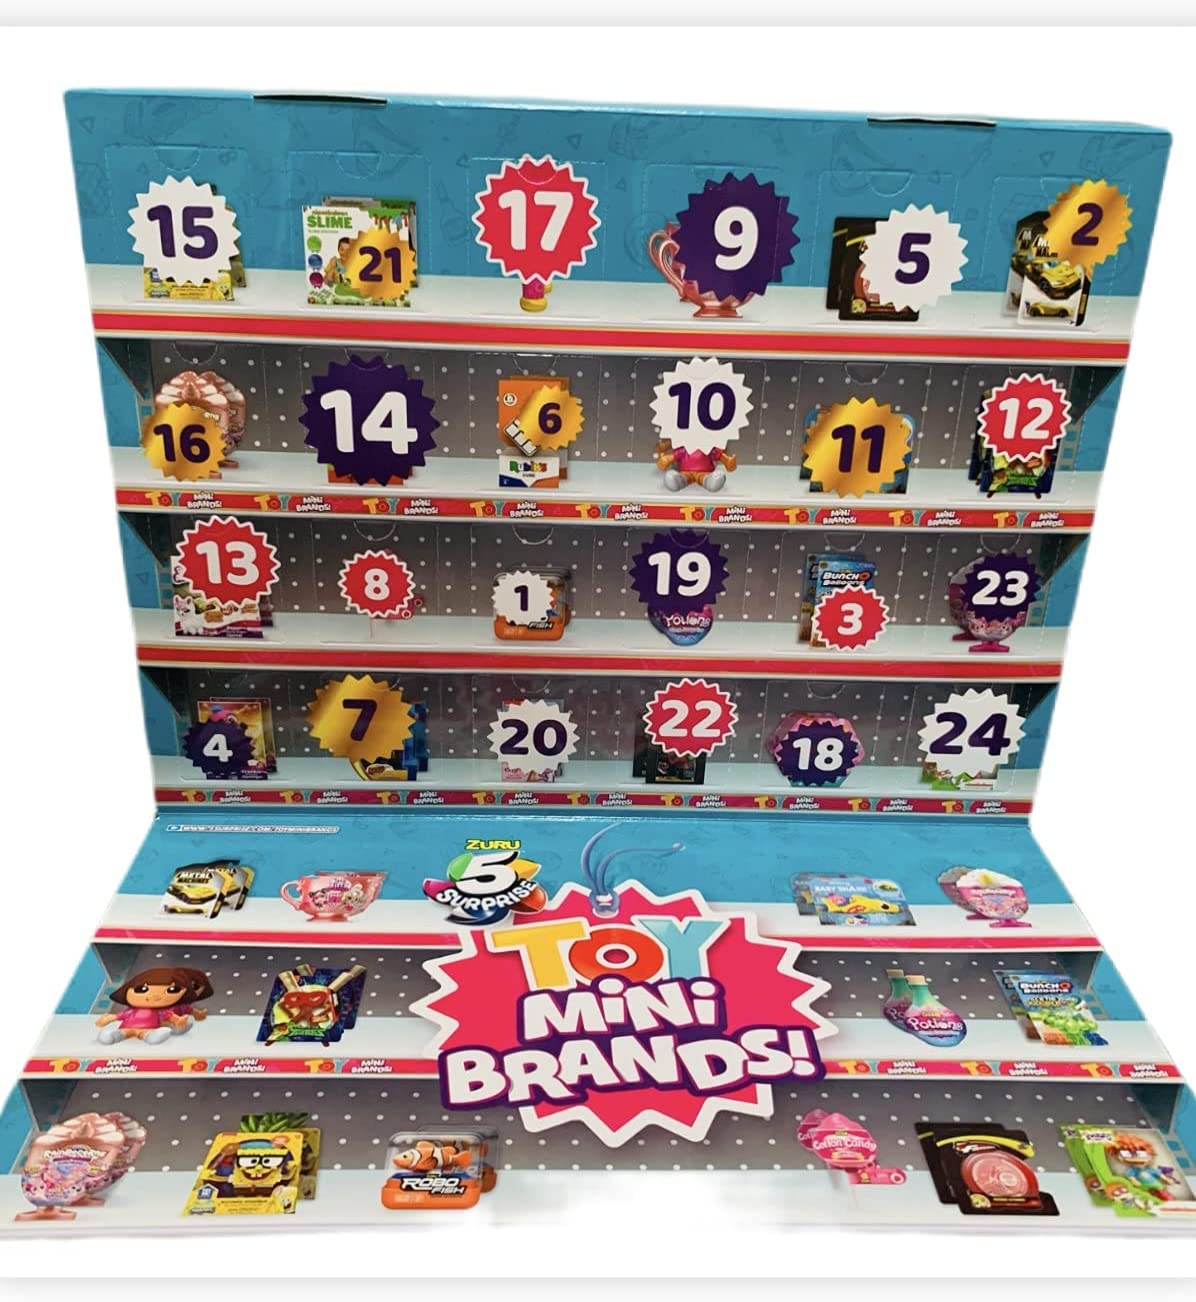 2022 Toy Mini Brands Advent Calendar from 5 Surprise 